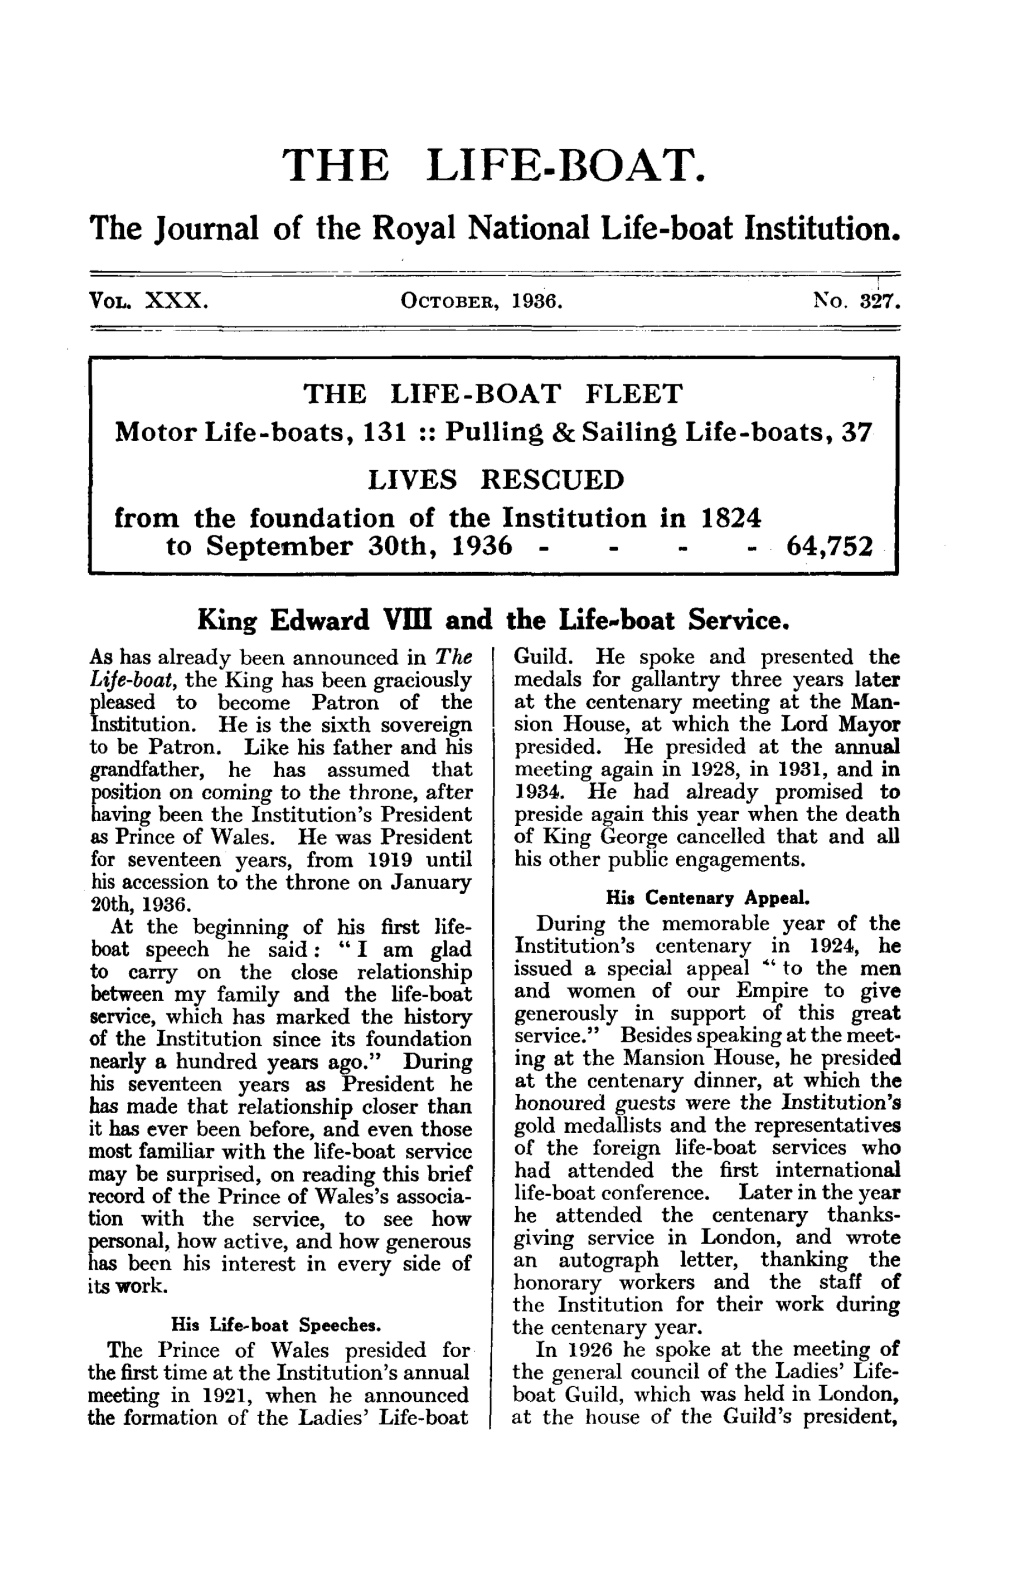 THE LIFE-BOAT. the Journal of the Royal National Life-Boat Institution